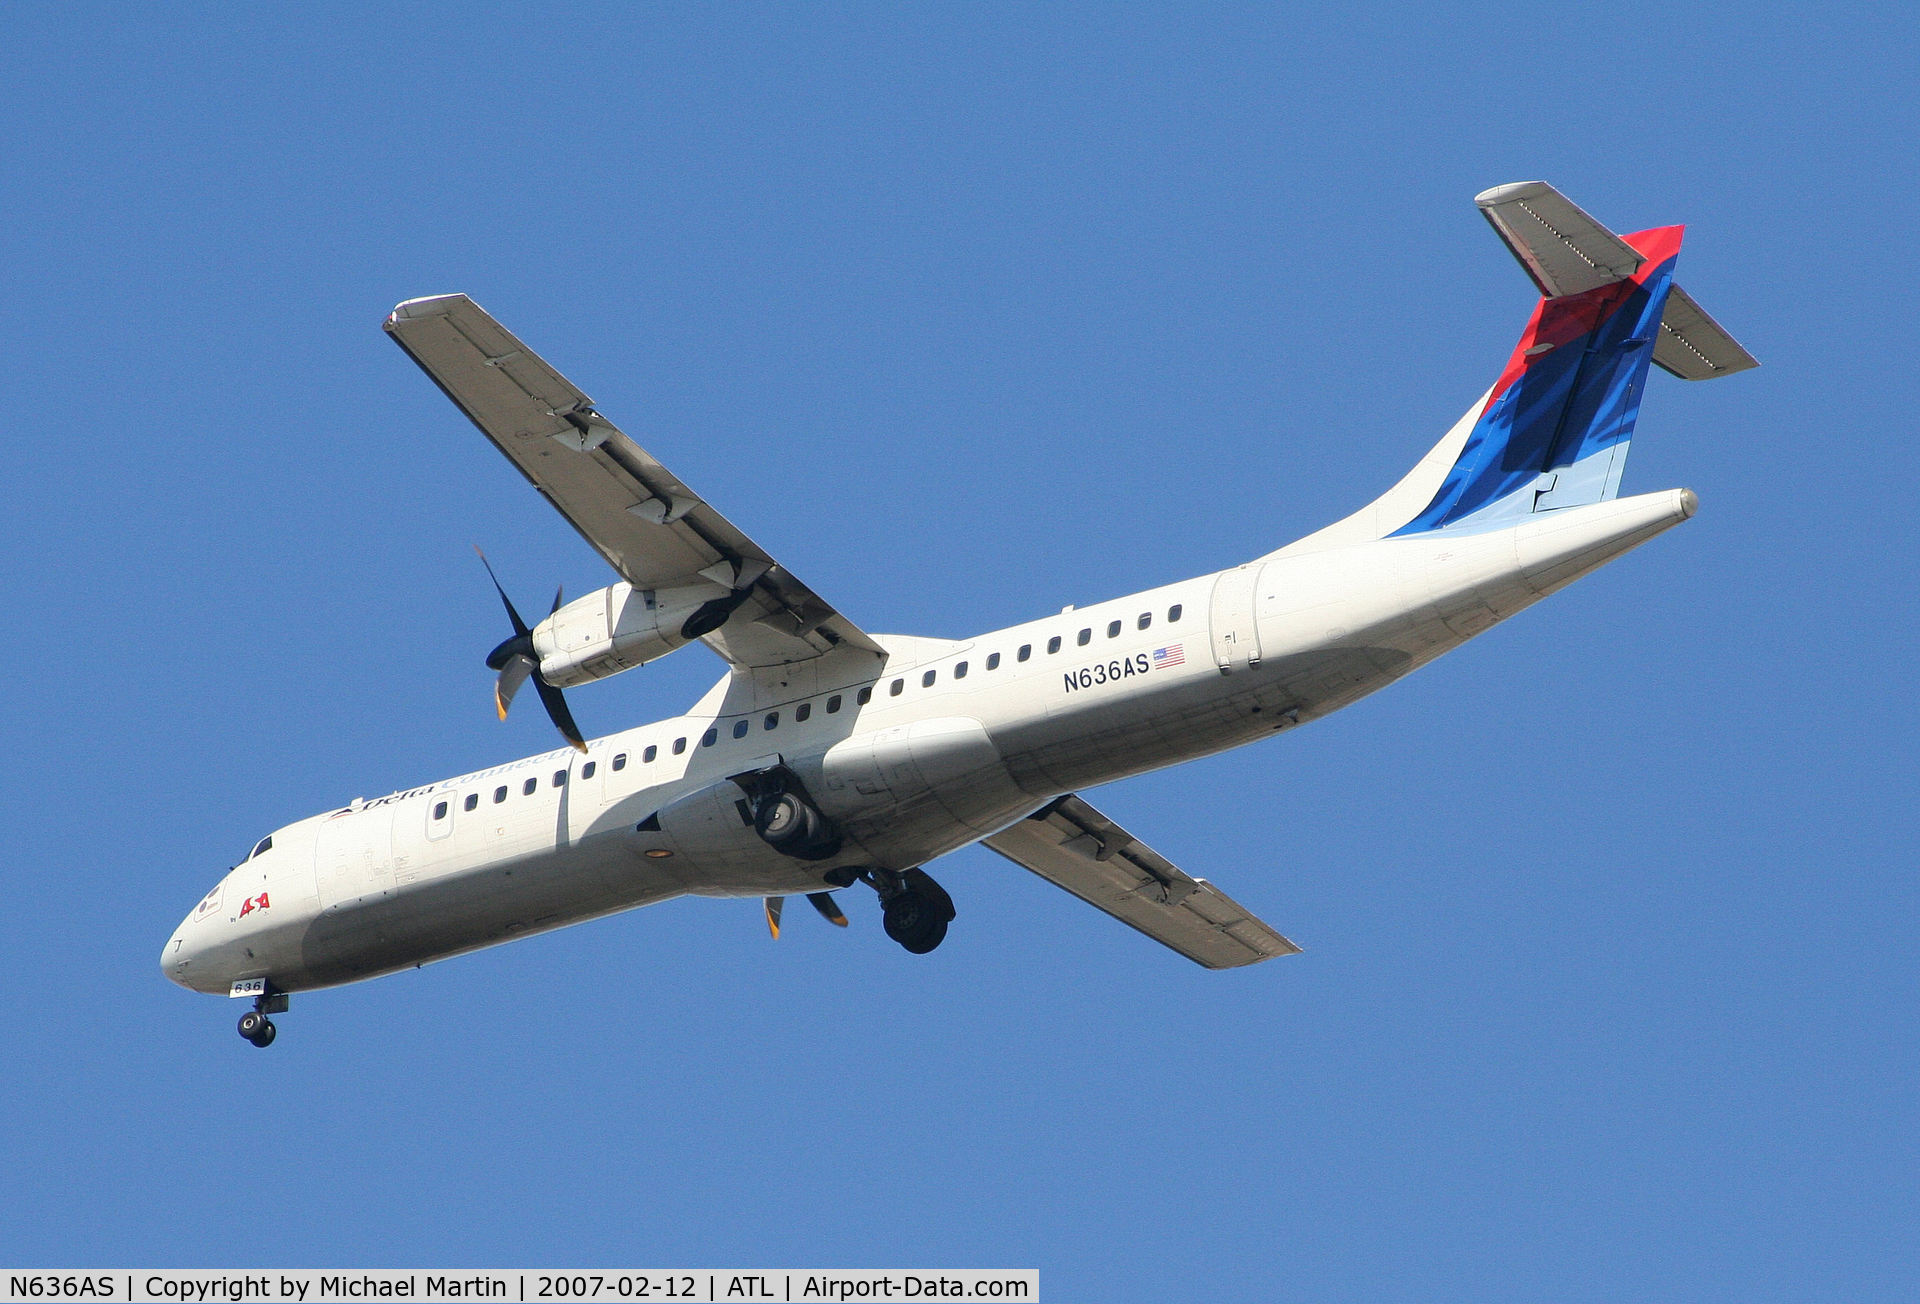 N636AS, 1993 ATR 72-212 C/N 375, Over the numbers of 26L